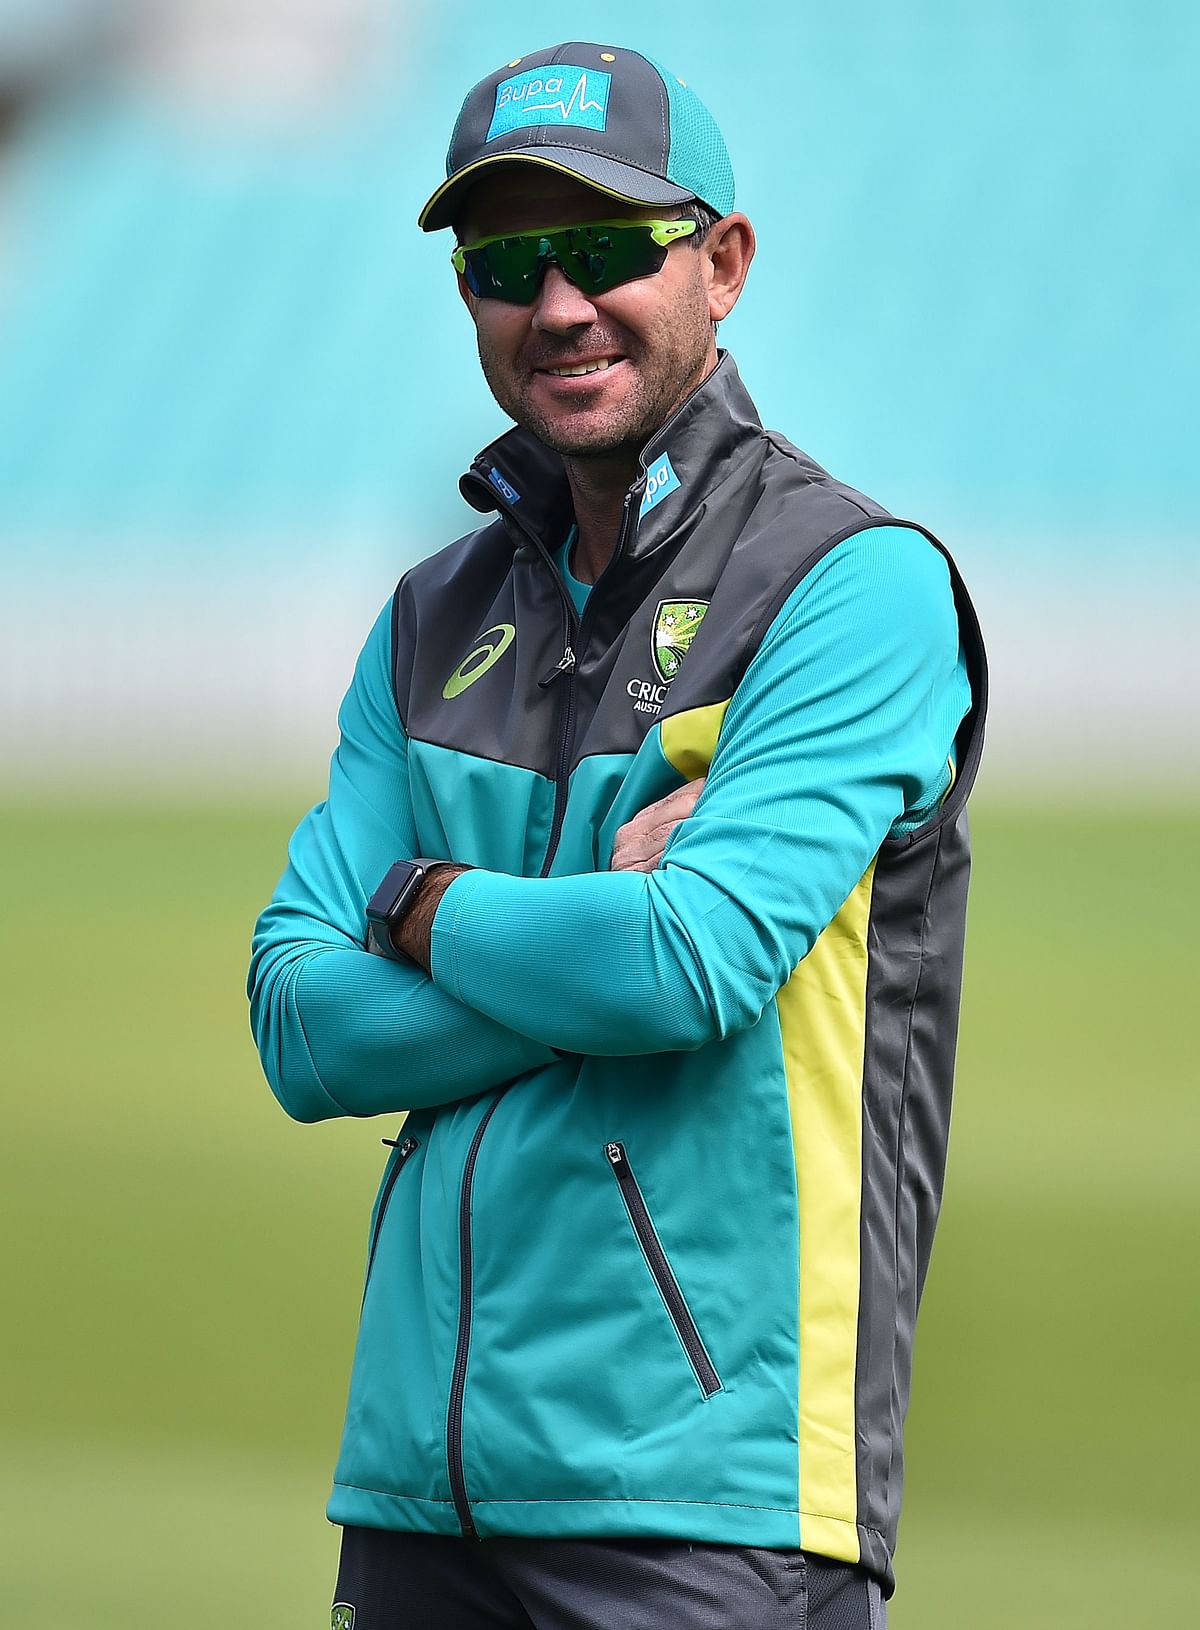 Former Australia captain Ricky Ponting takes part in a practice session at the Oval cricket ground in London on 11 June, 2018 ahead of their one day international series against England. Photo: AFP